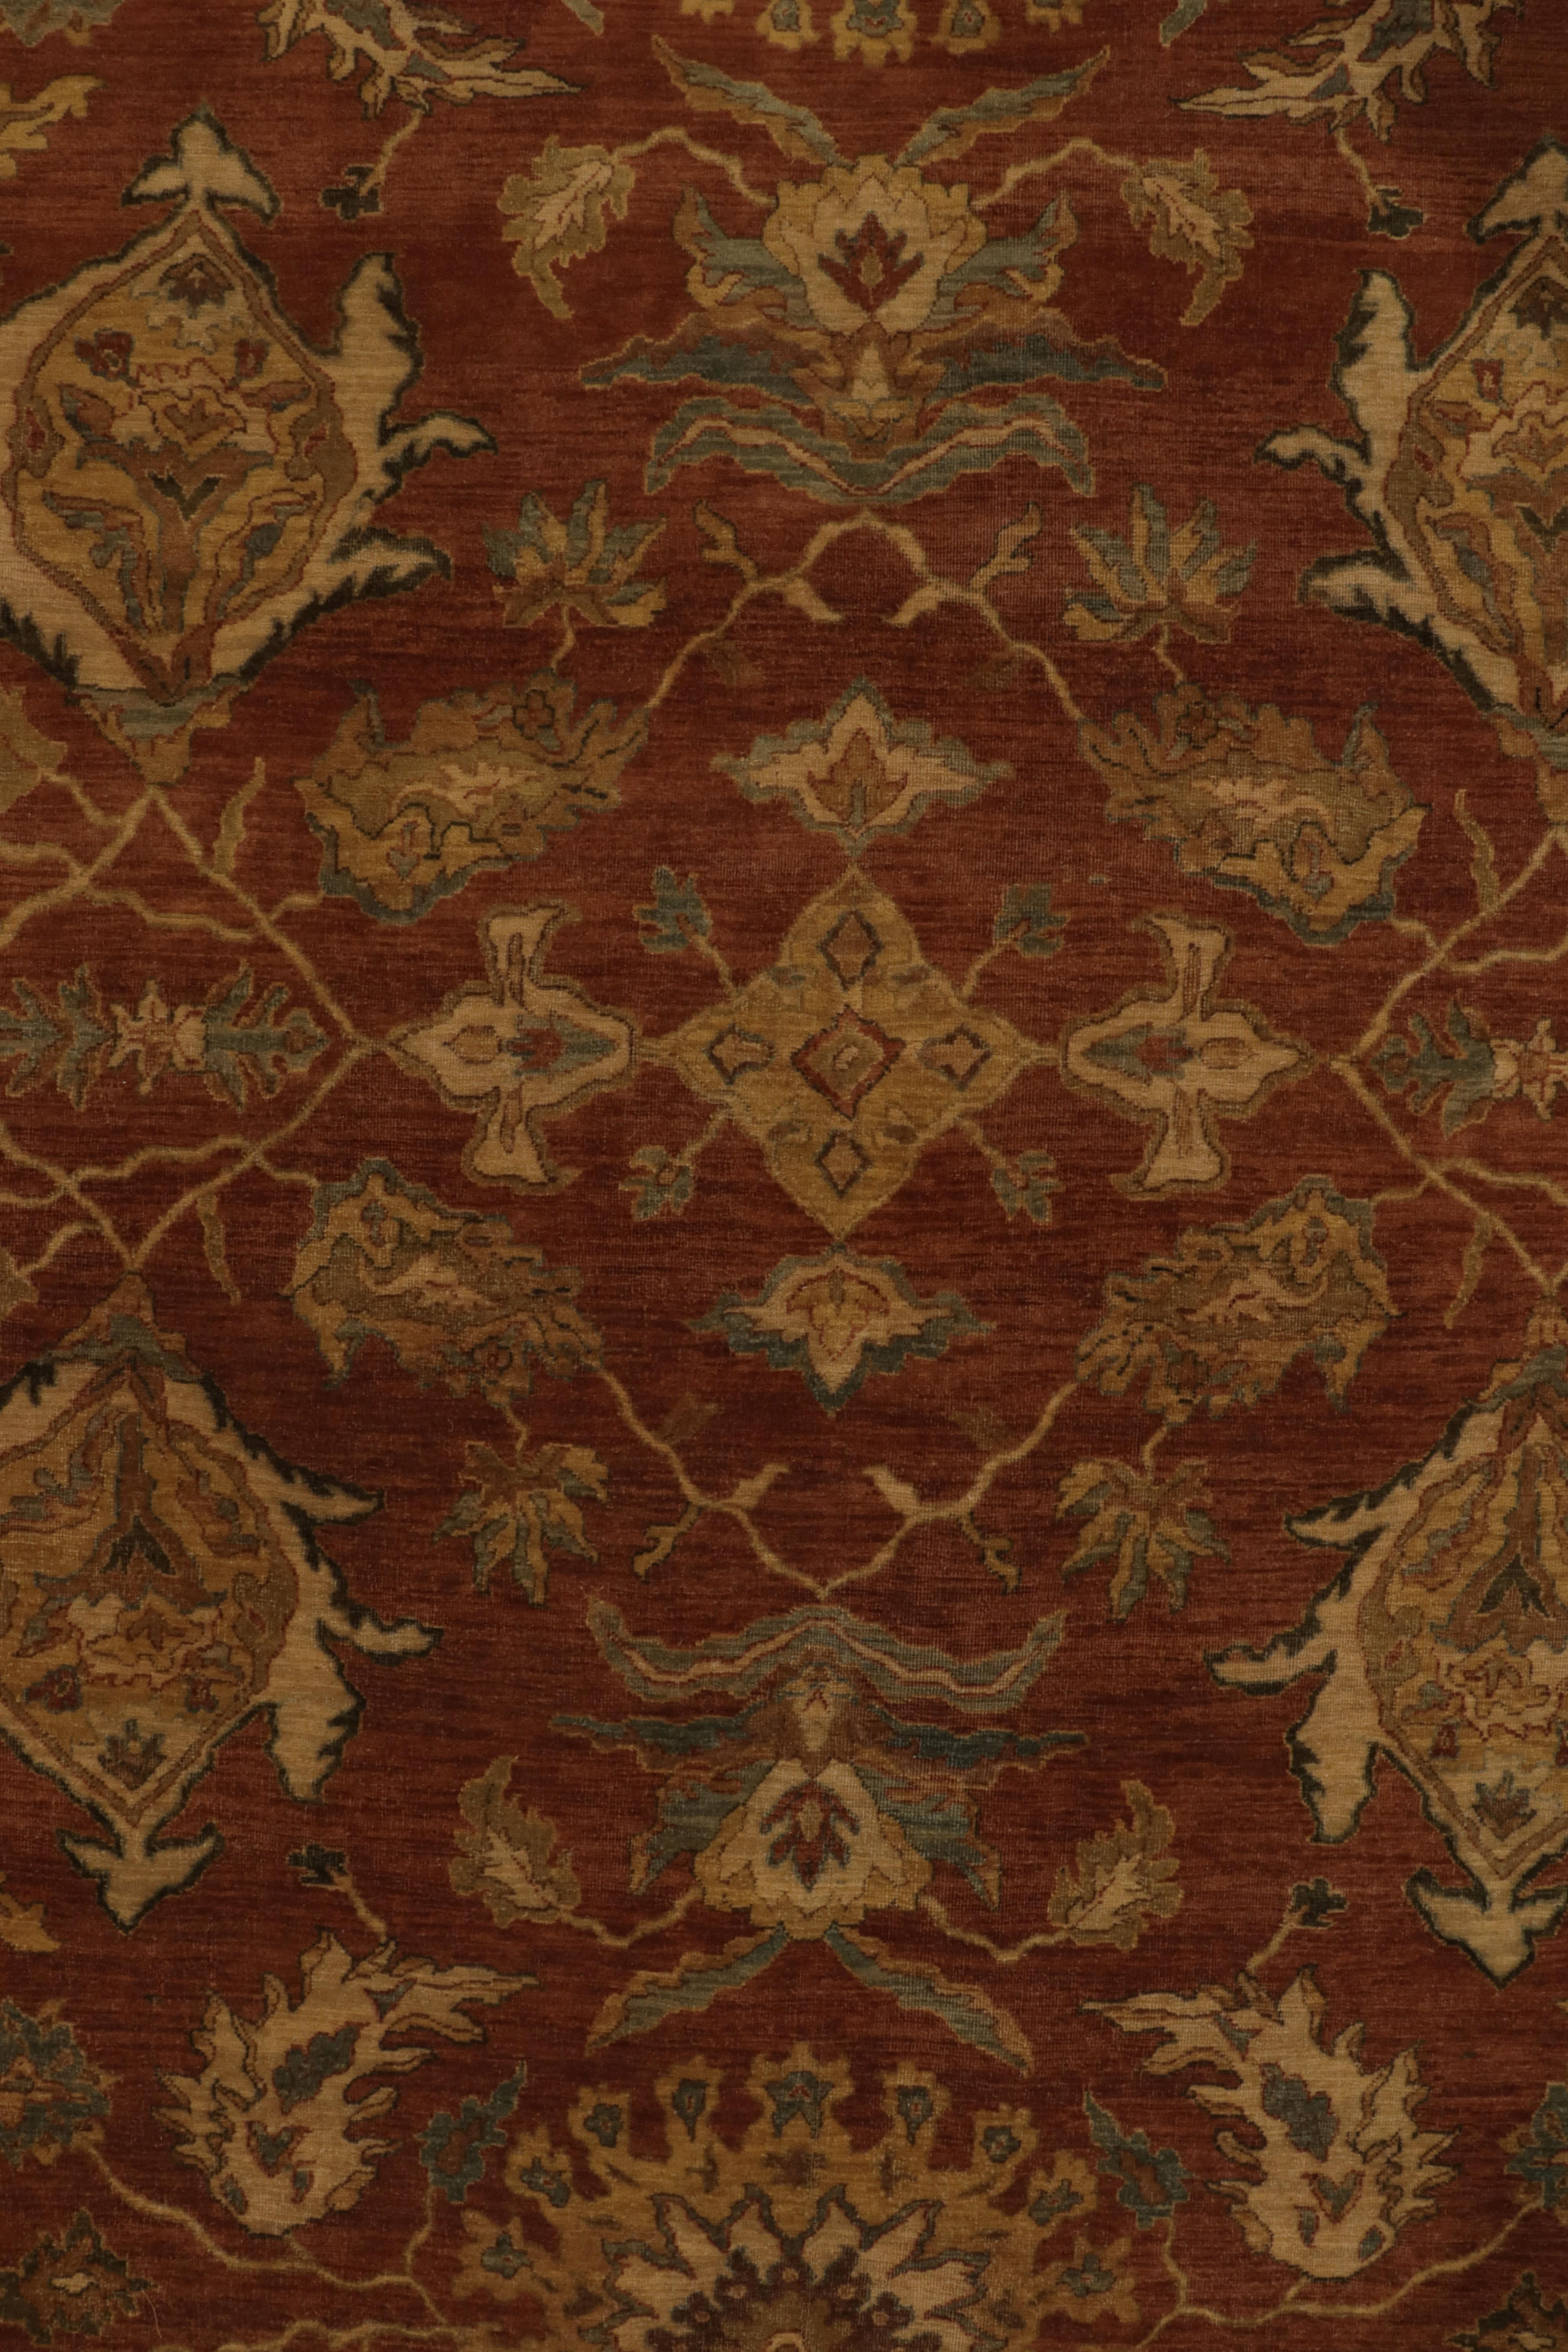 Contemporary Rug & Kilim's Classic Tabriz Style Rug with Beige & Blue Florals on Rust Red For Sale